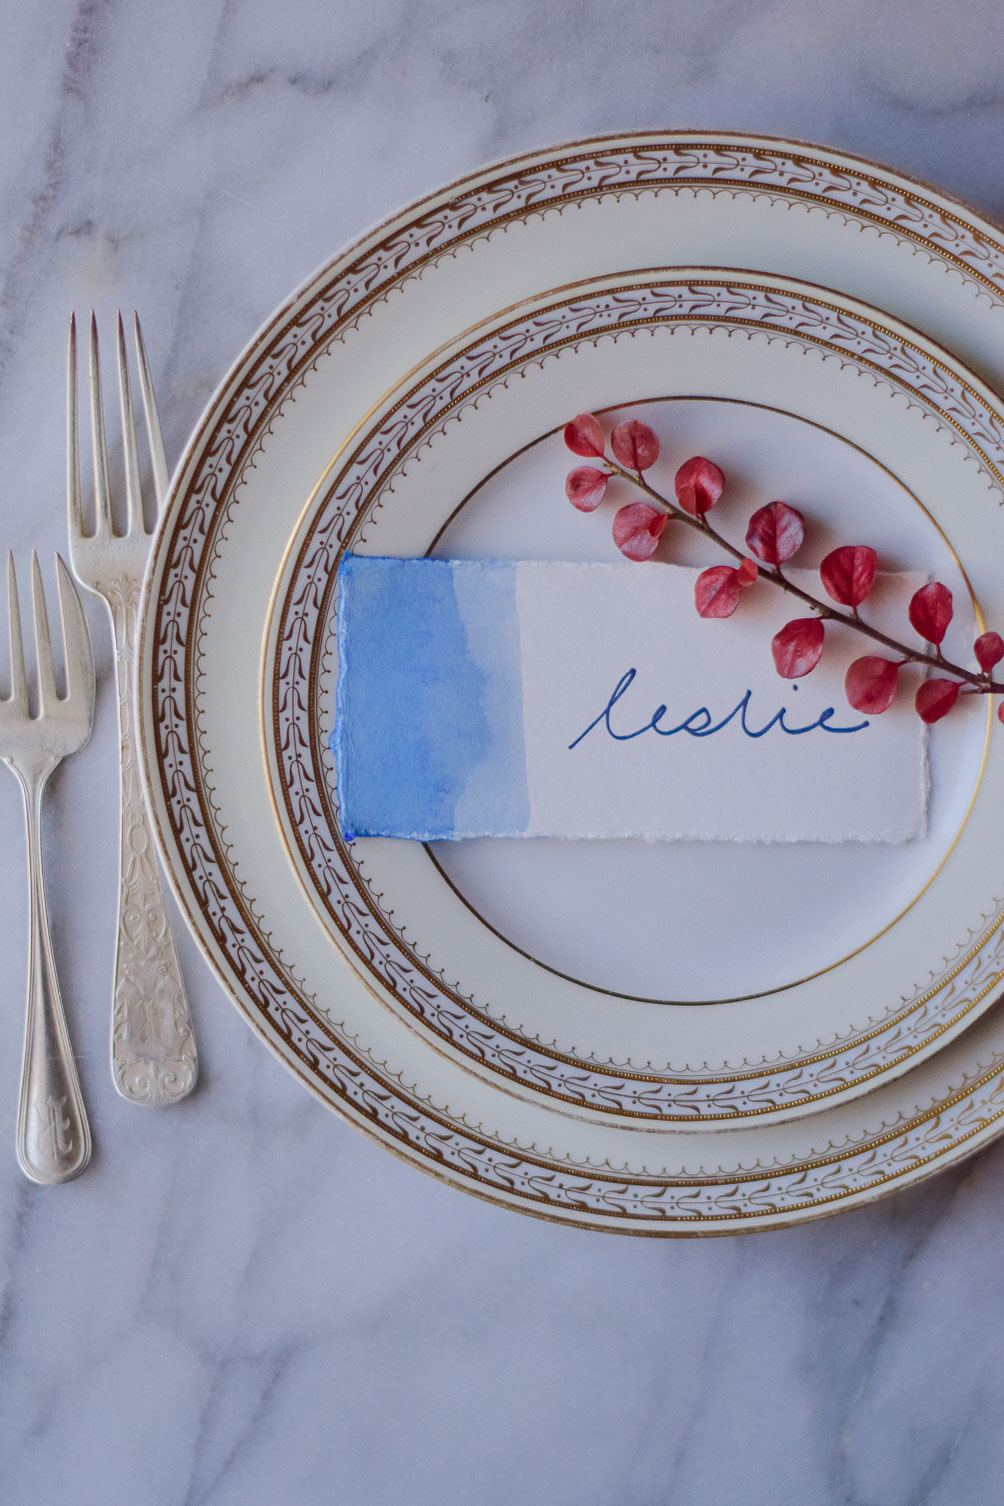 DIY watercolor placecards with an ombre effect for the Thanksgiving tablescape decor